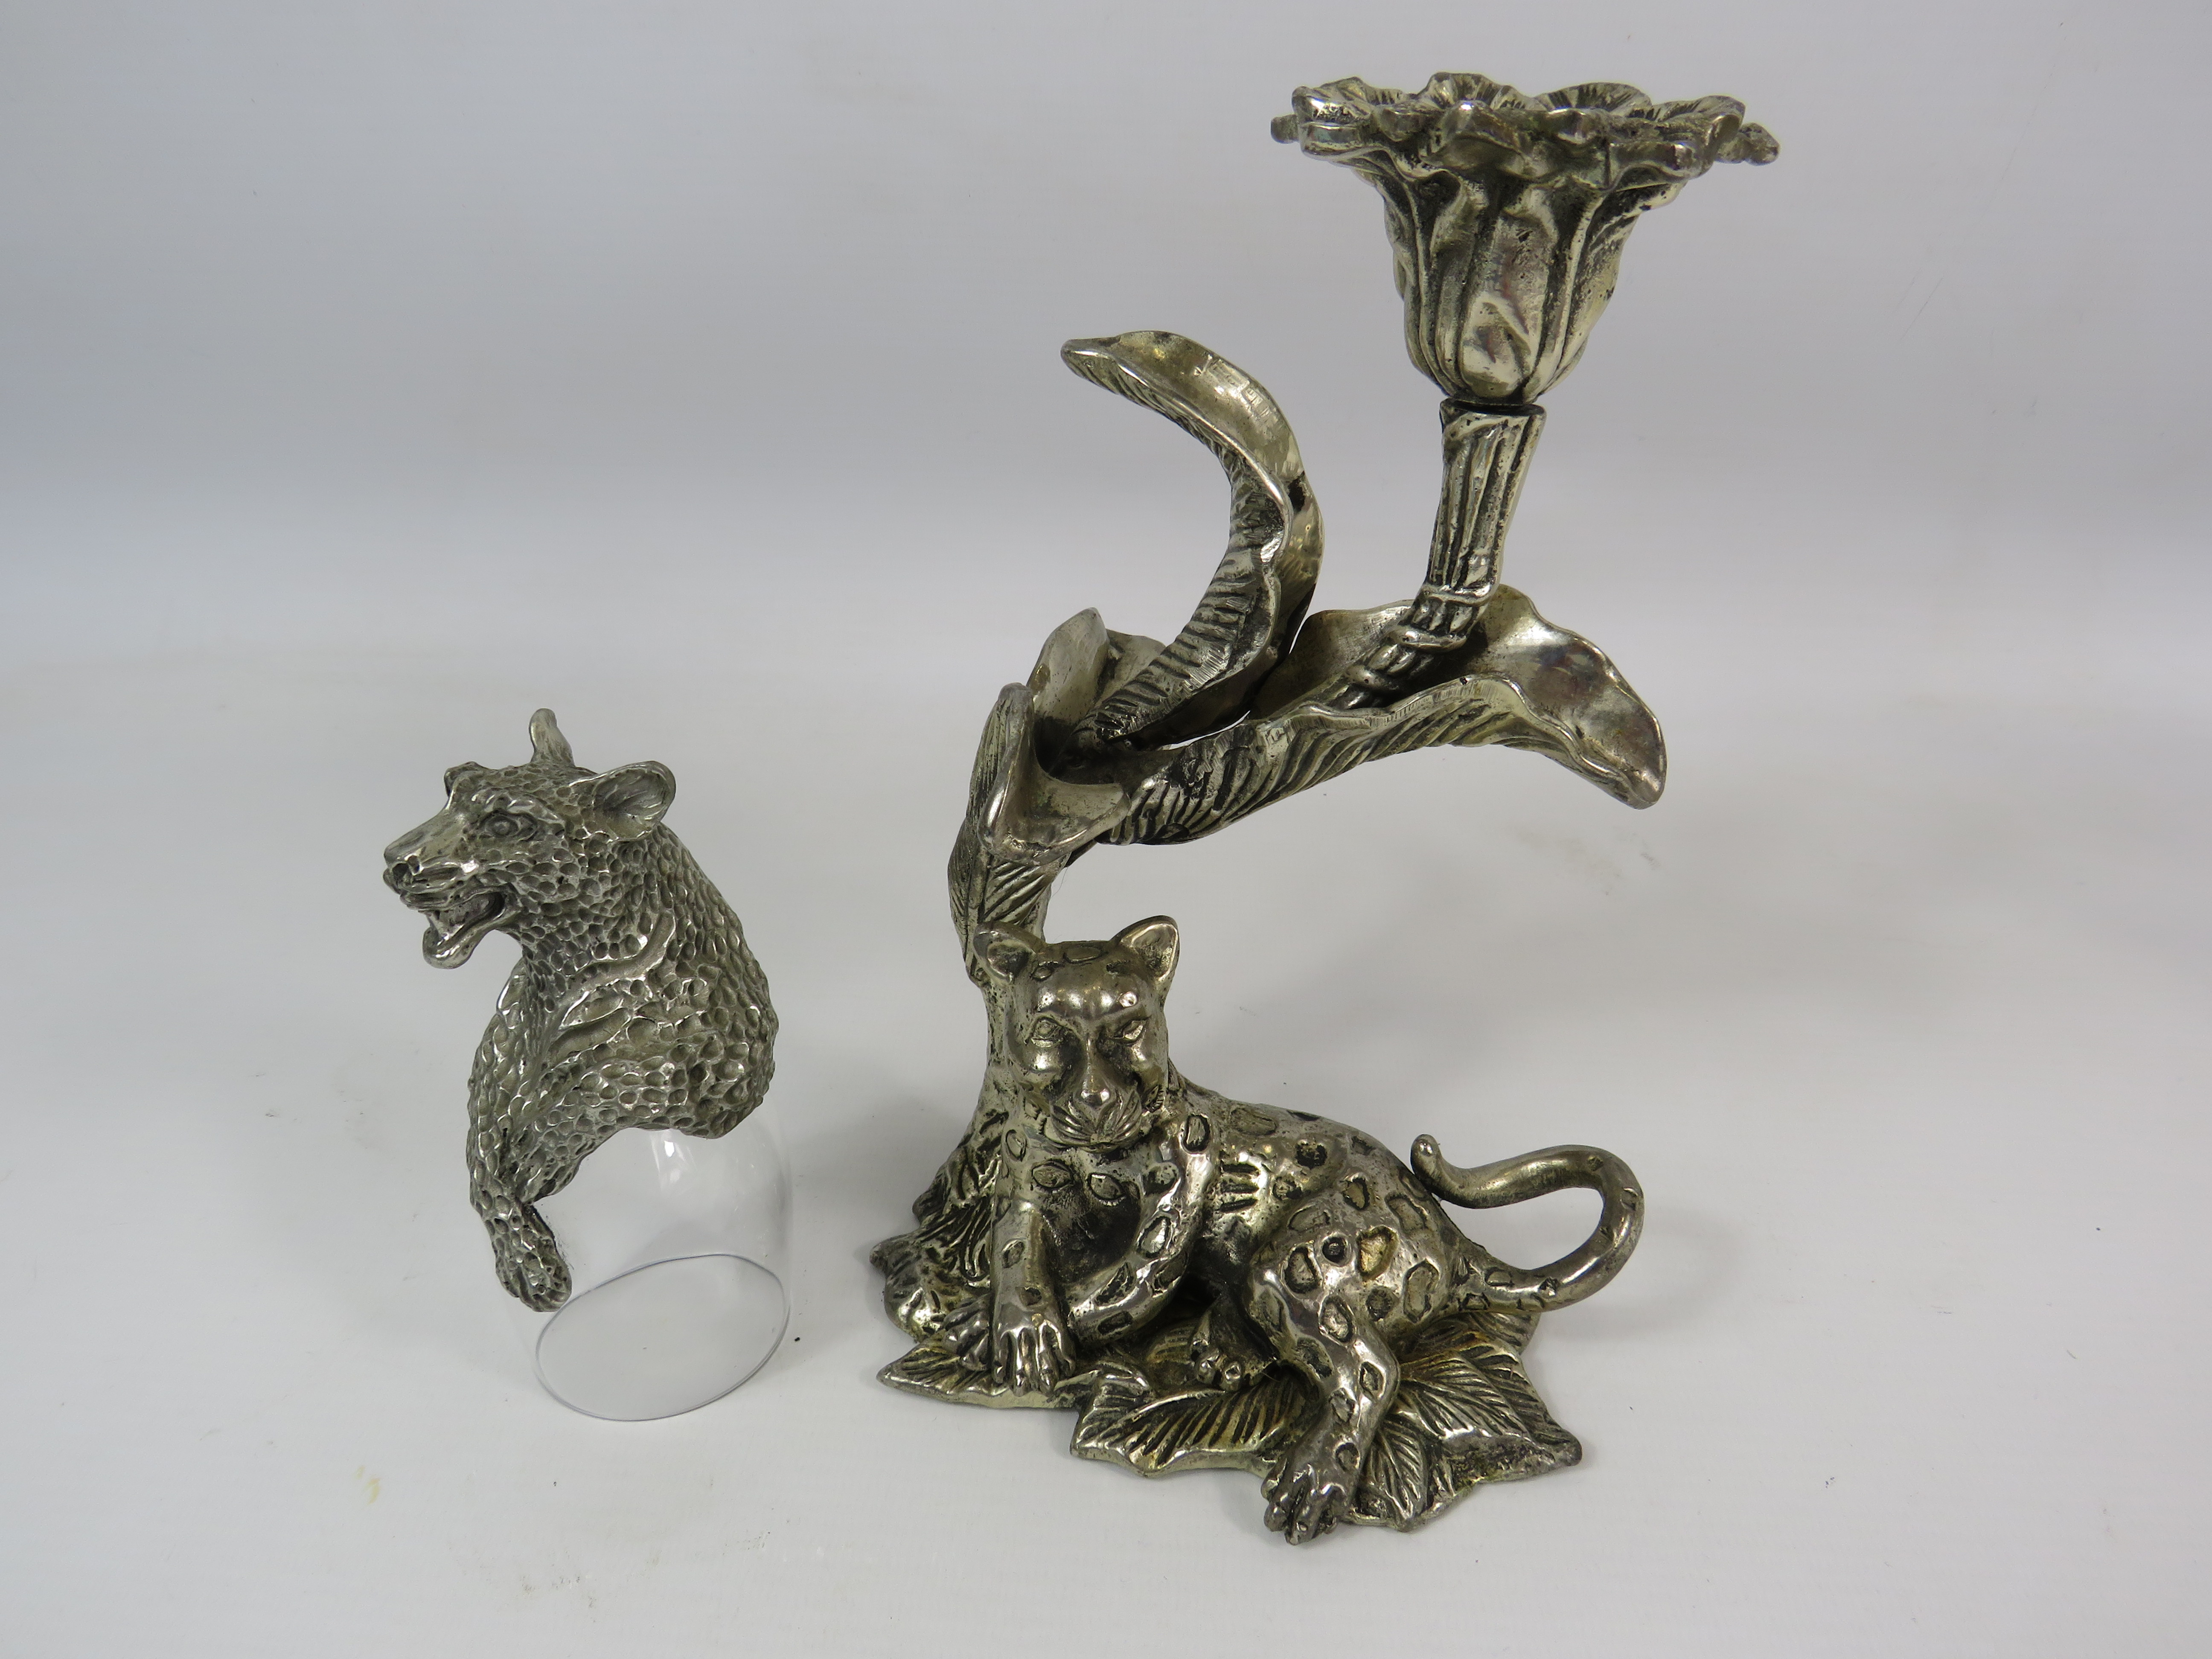 Franklin Wild Royal Selangor stirrup cup plus a white metal candle holder with a recumbant leopard - Image 3 of 3